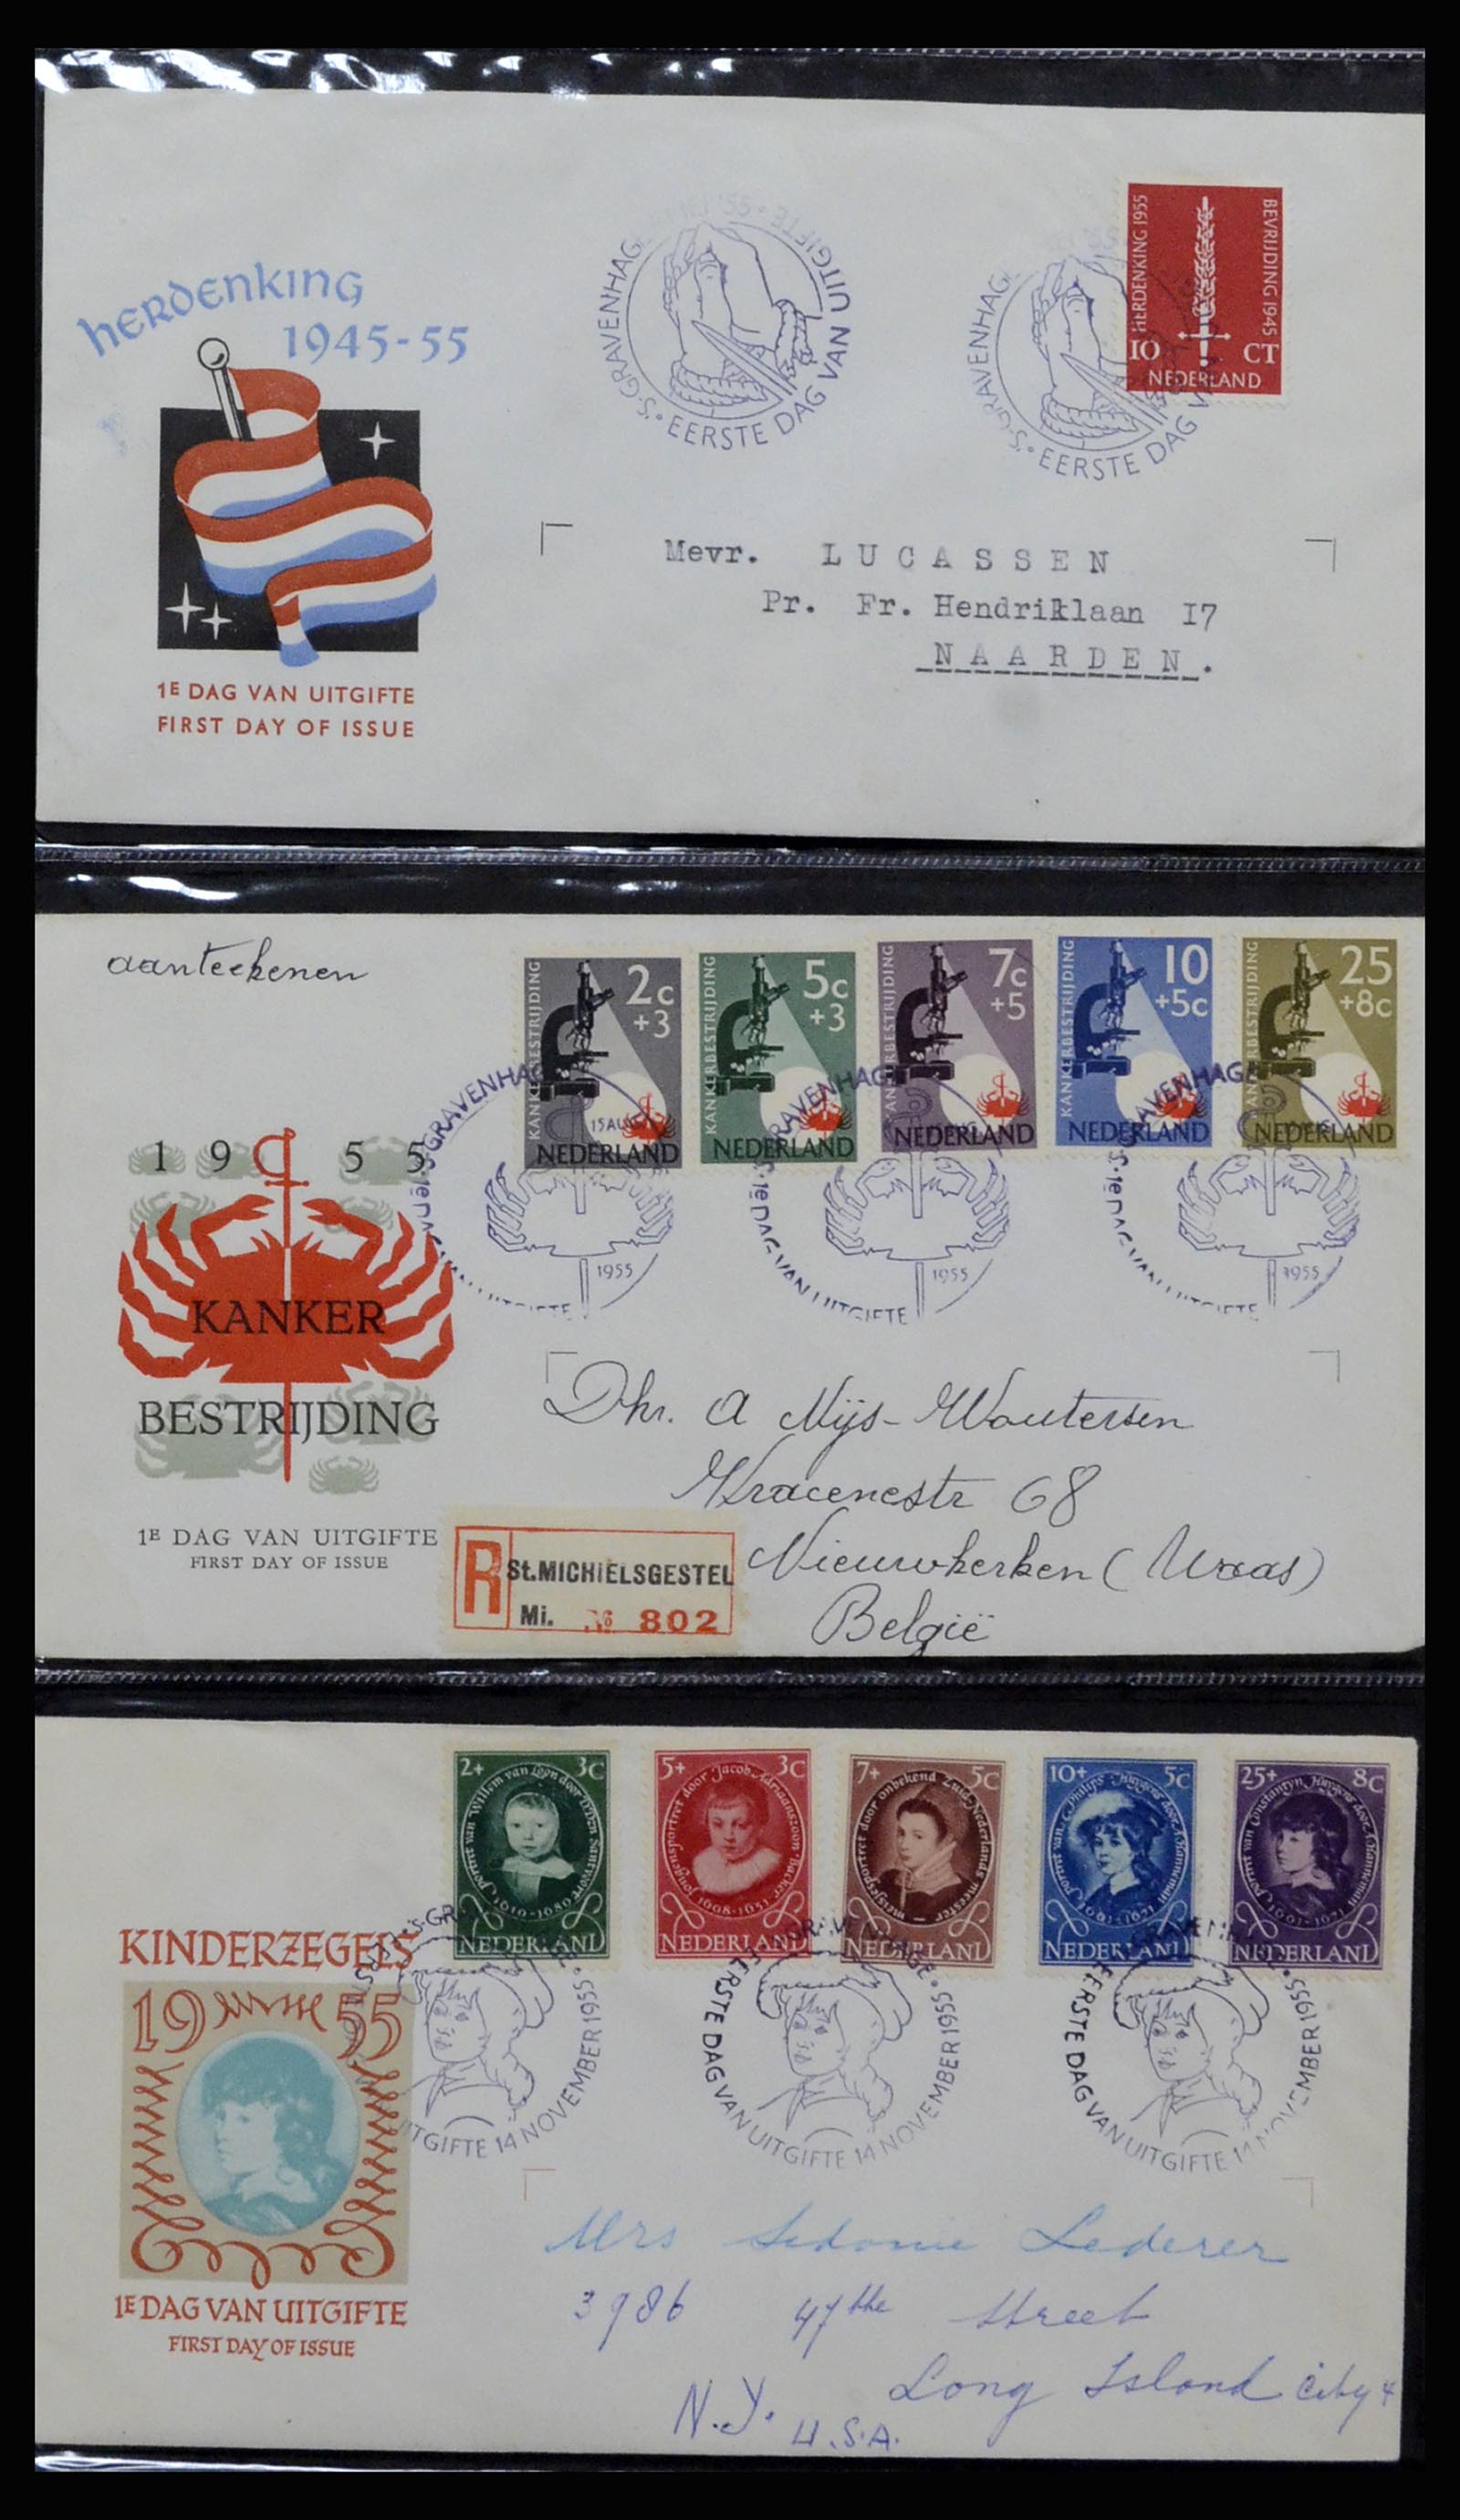 37197 009 - Stamp collection 37197 Netherlands FDC's 1950-2004.